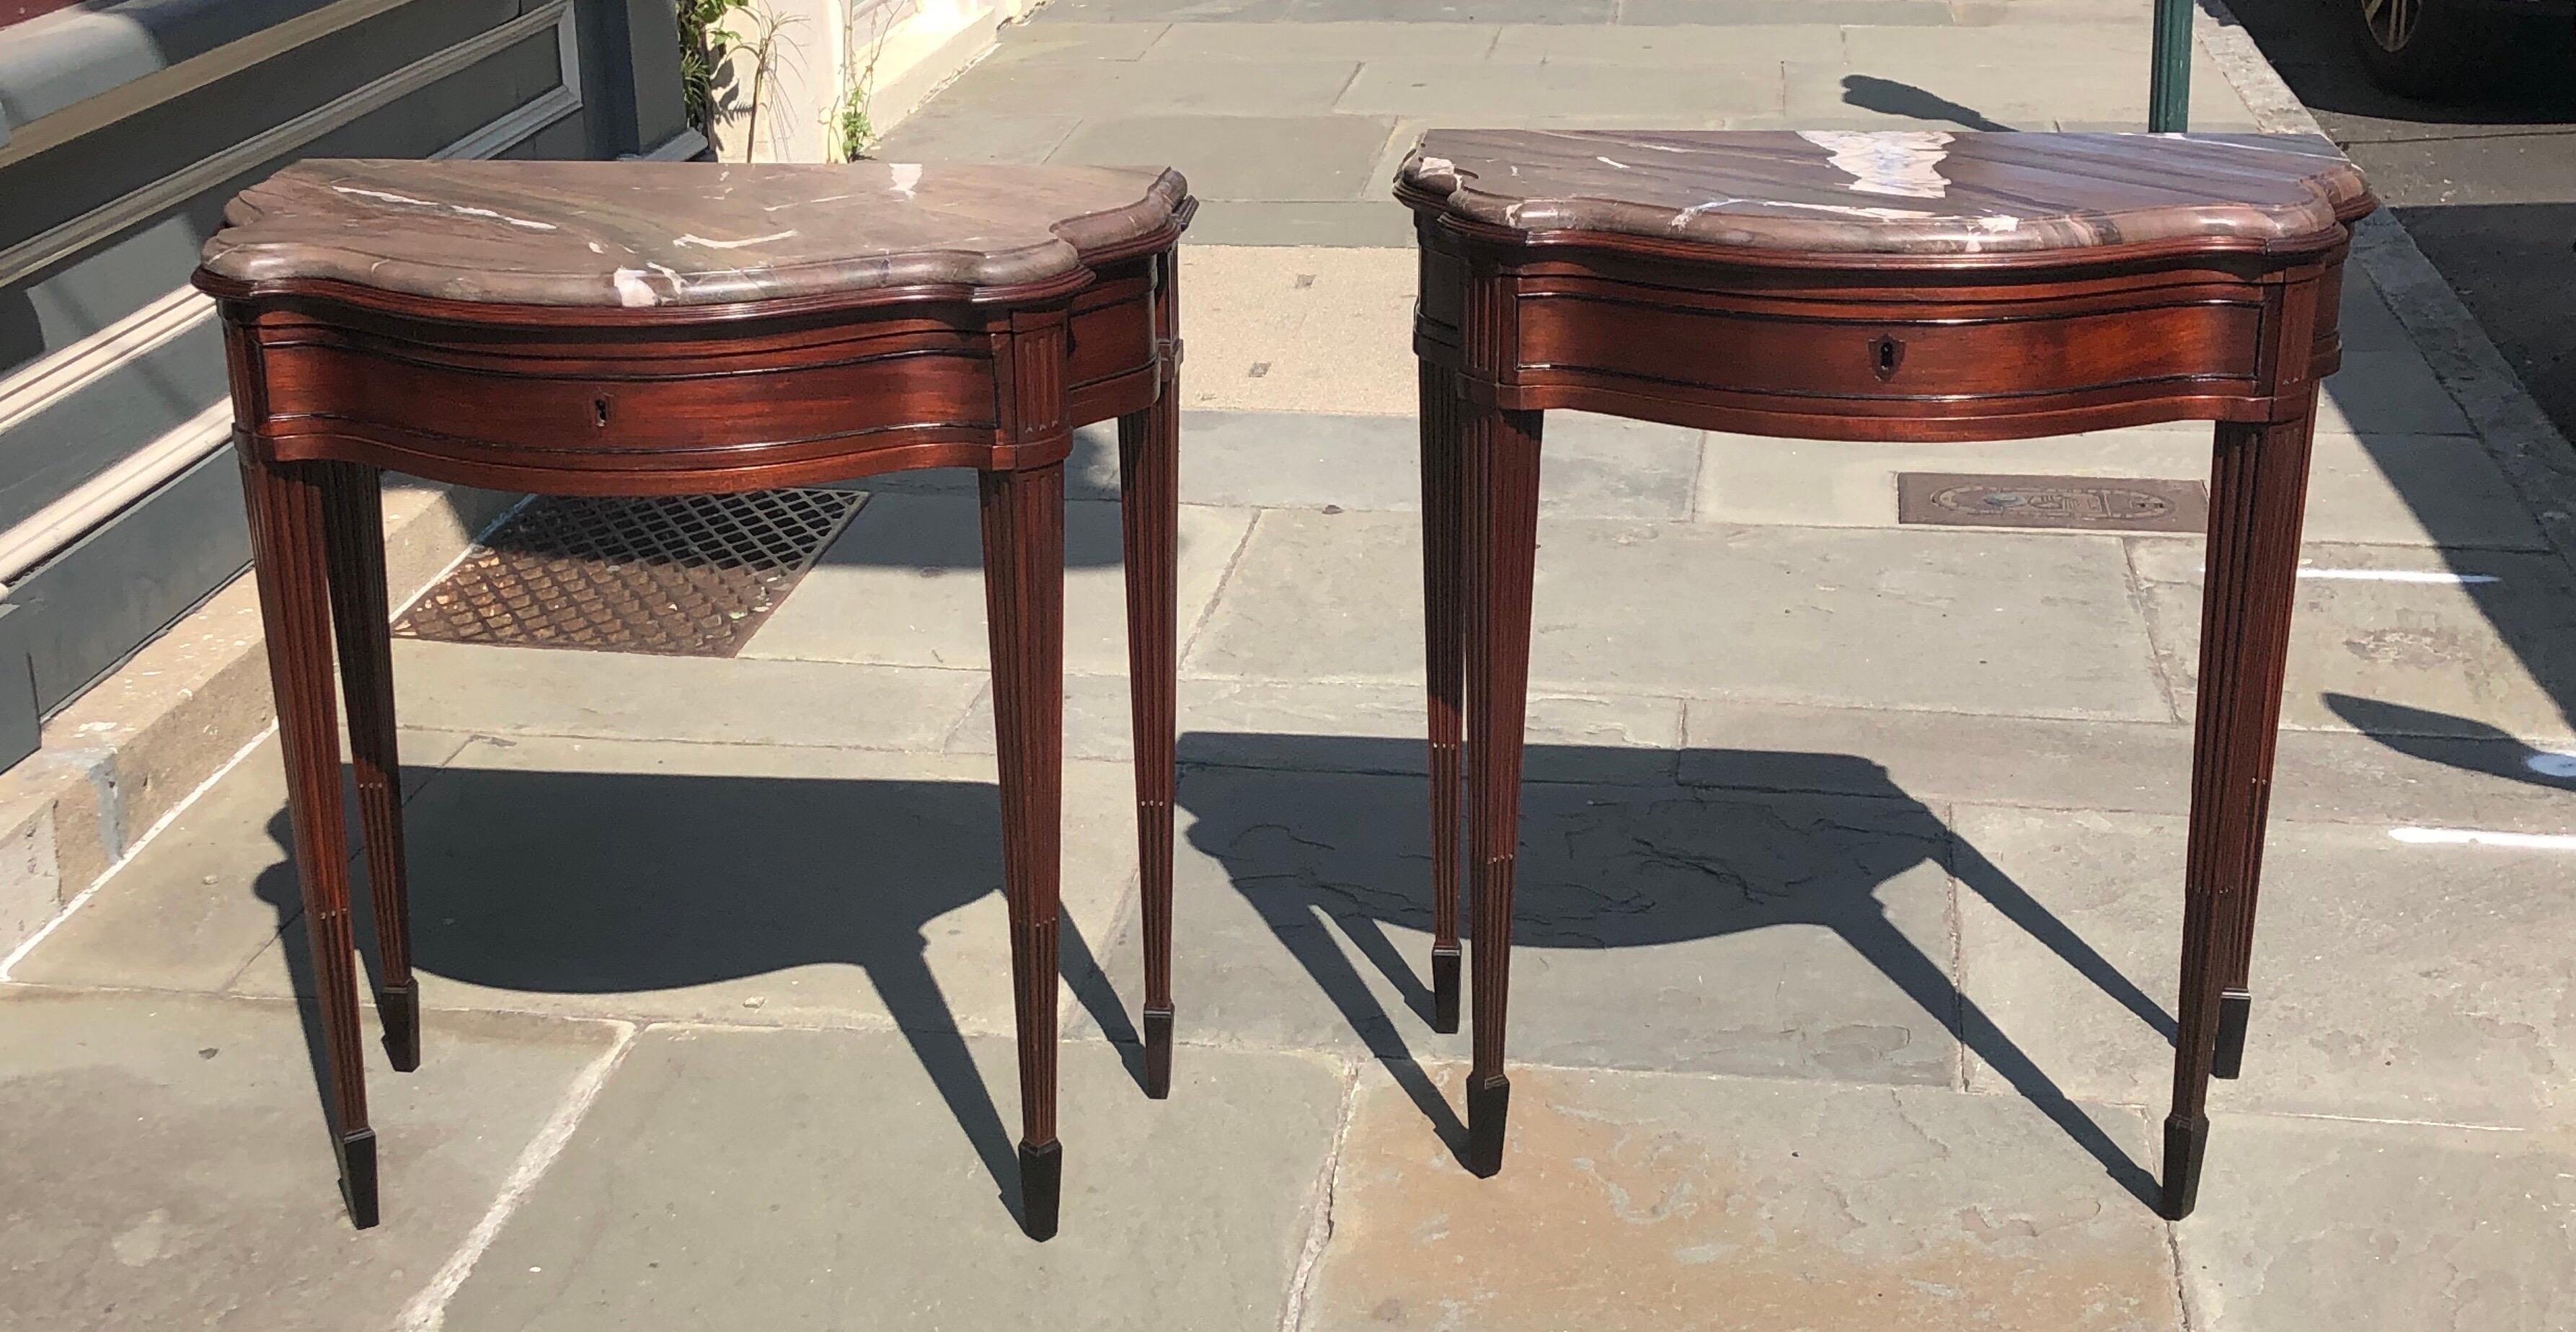 Elegant pair of mahogany neoclassical consoles with marble tops. These Classic consoles are a solid mahogany with a single-drawer. Each console has fluted mahogany legs going down to ebony stop fluting in the center of each flute. The legs are